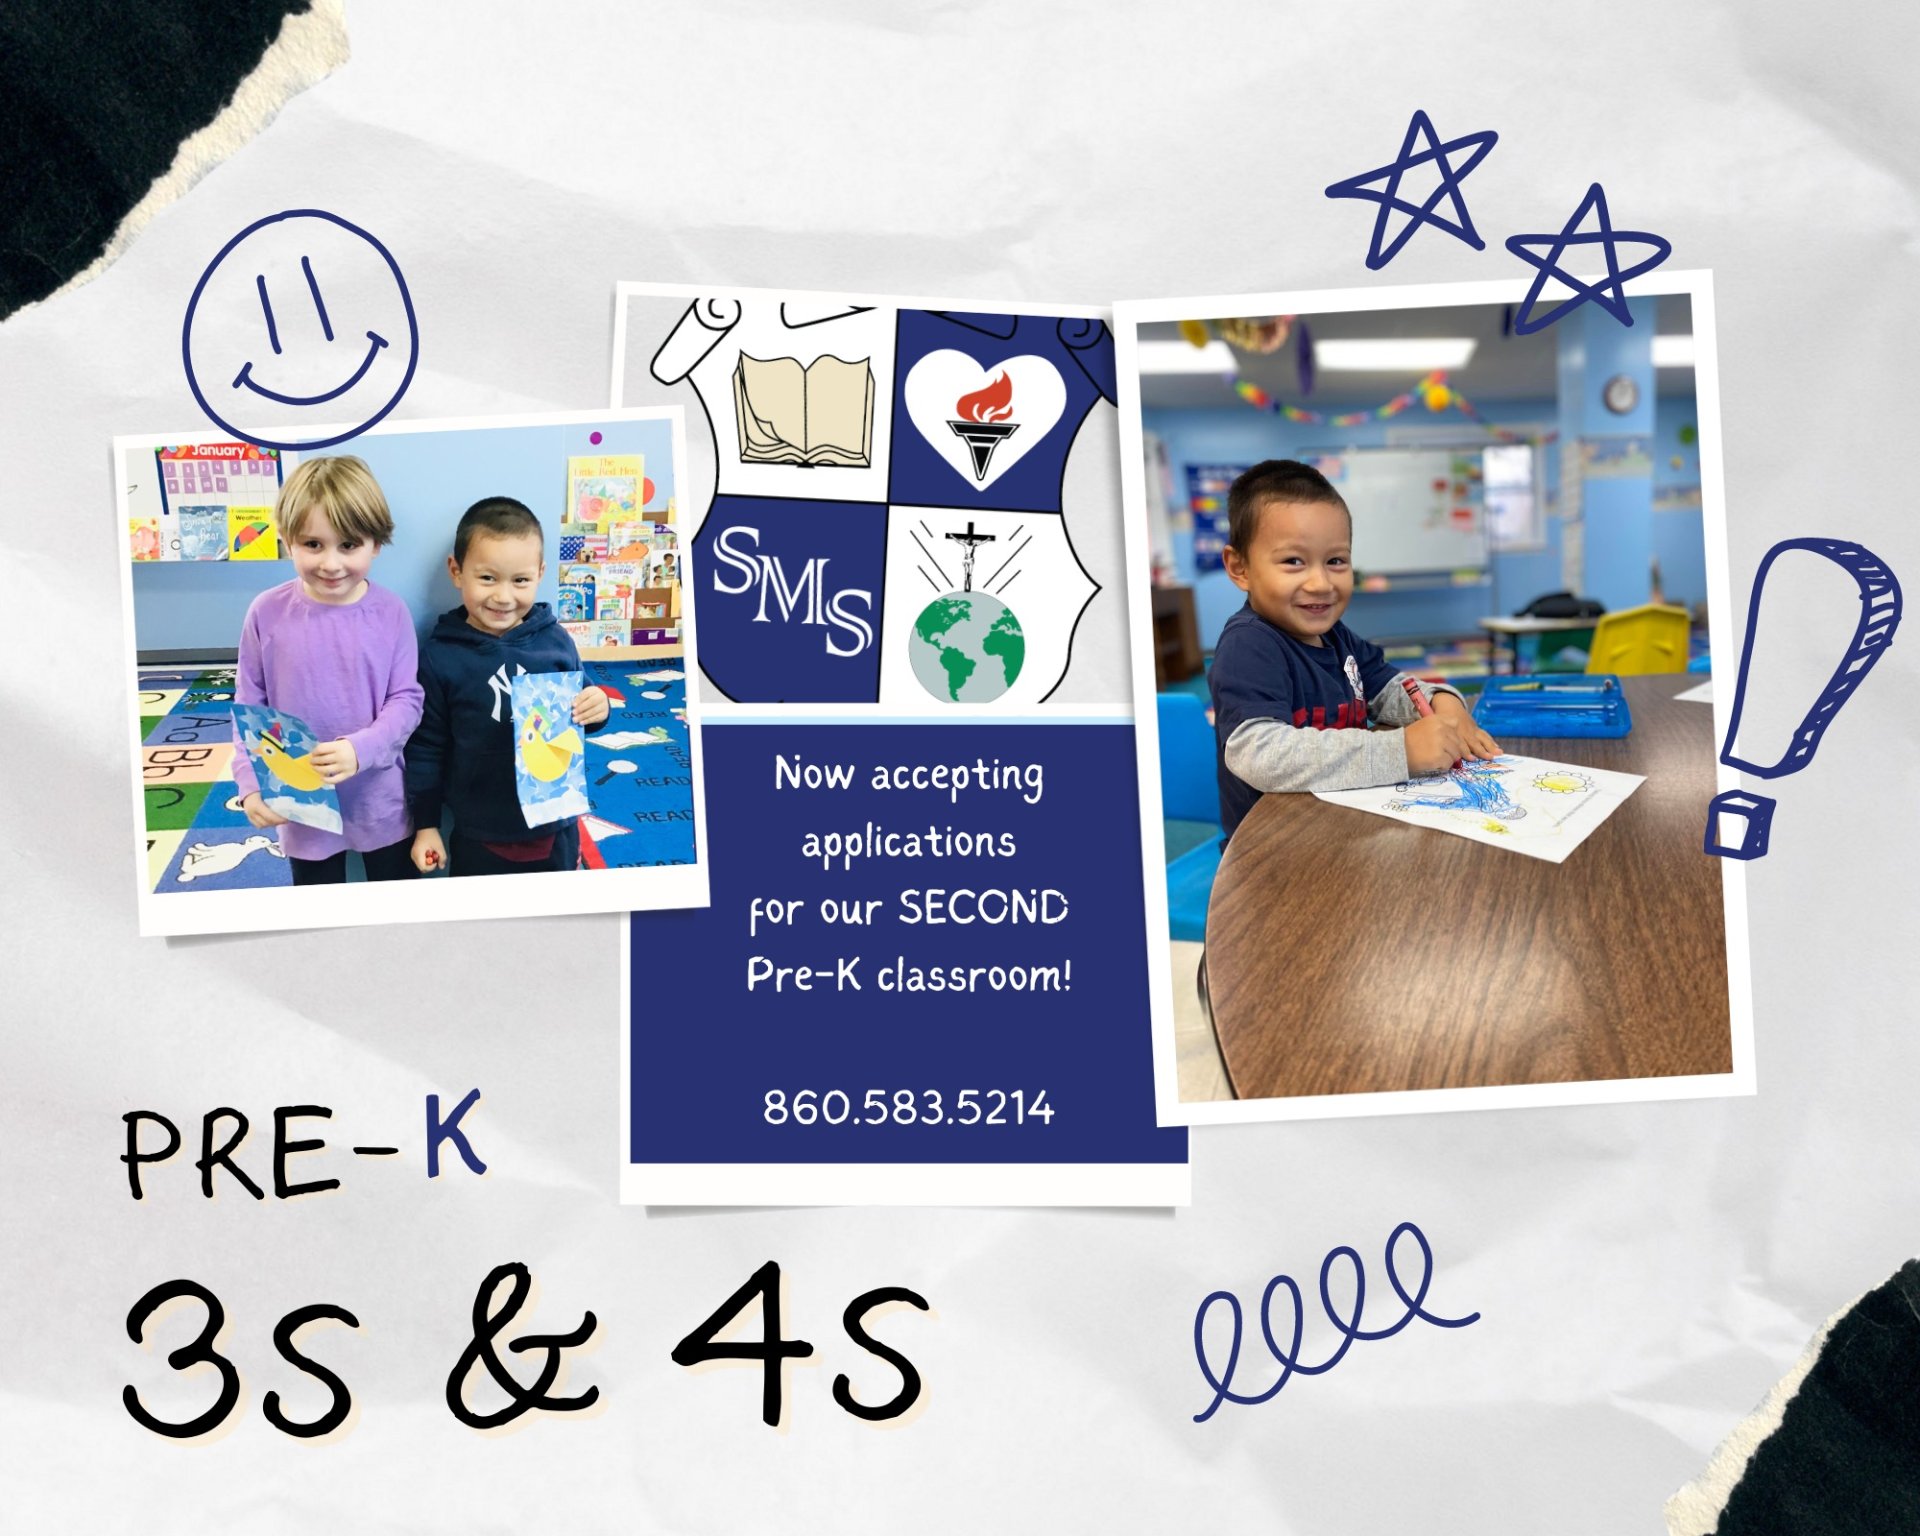 With High Interest, Our Pre-K Program is Expanding!